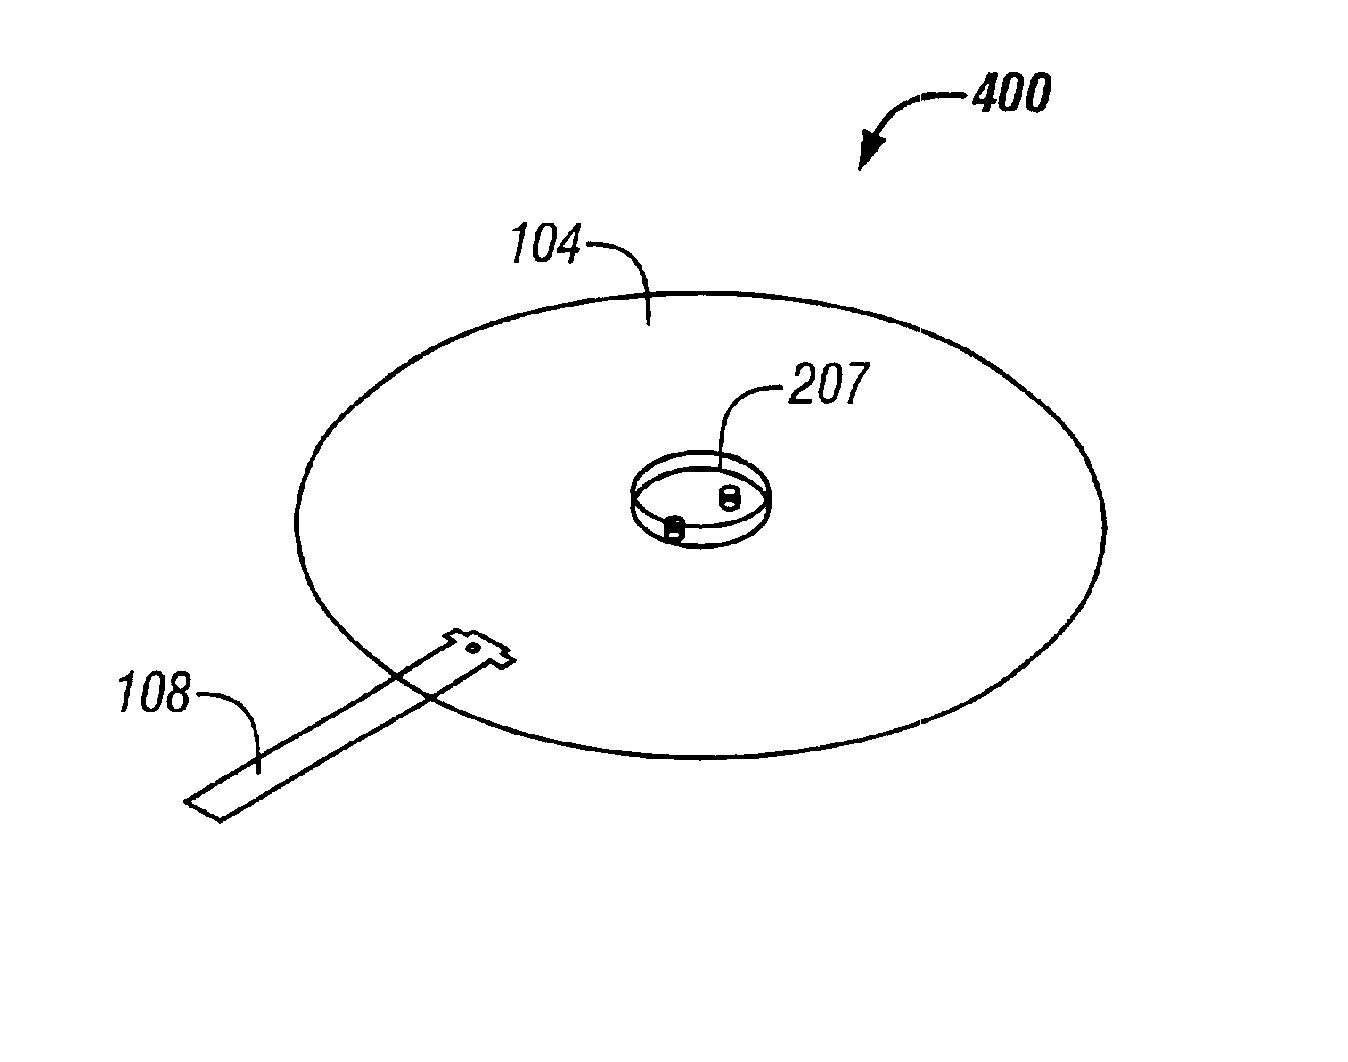 Process condition sensing wafer and data analysis system